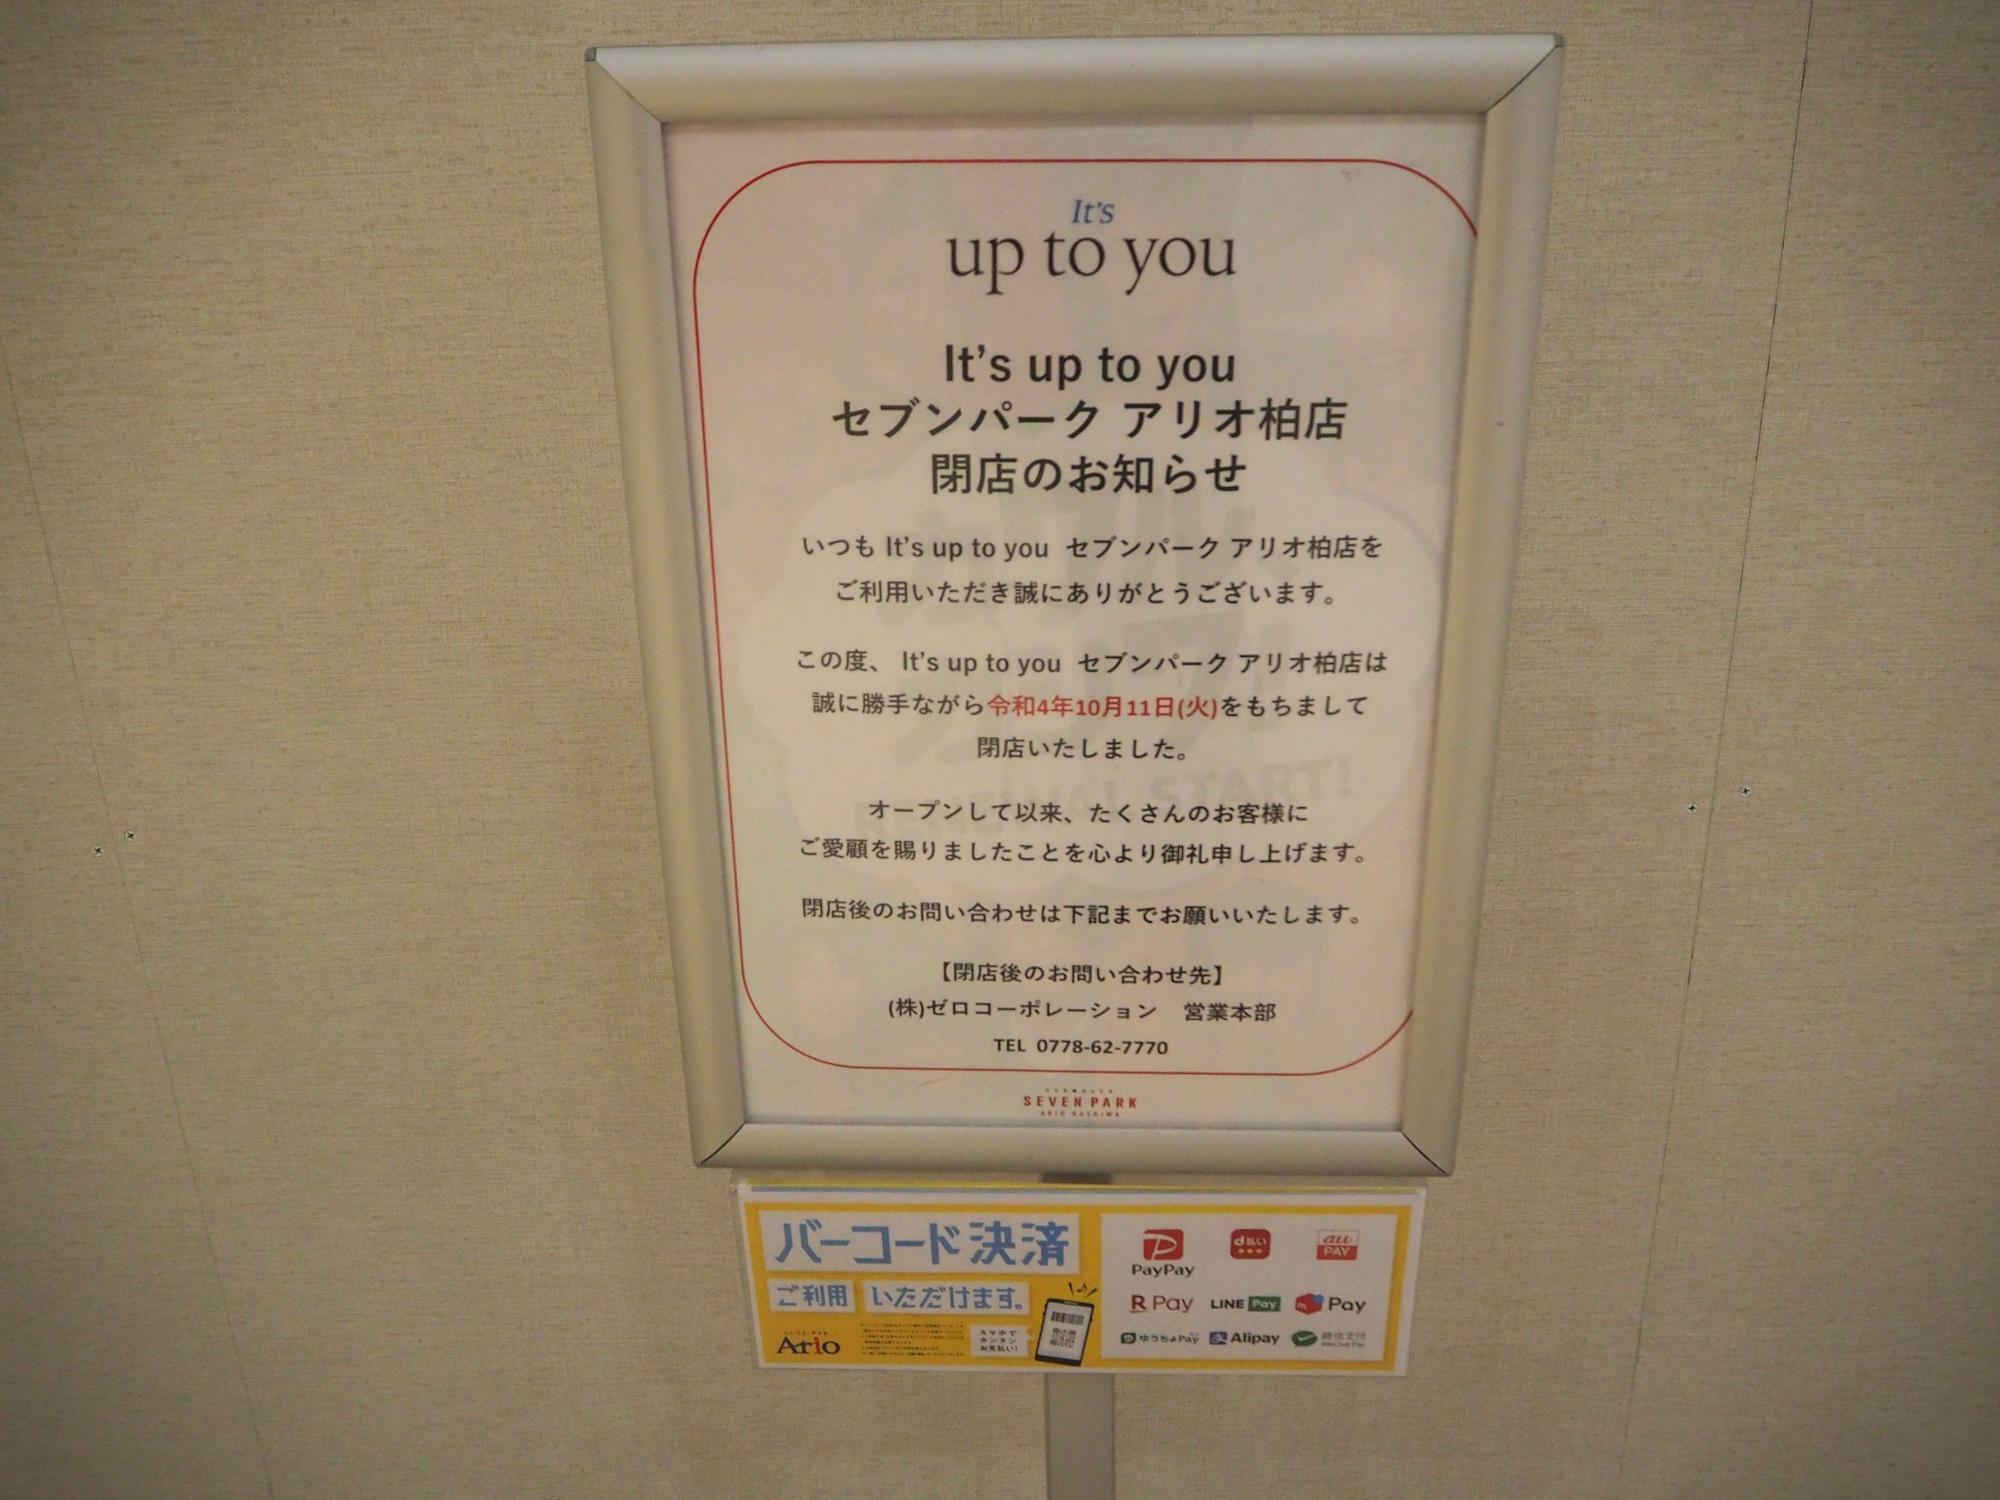 「It’s up to you セブンパークアリオ柏店」閉店のお知らせ